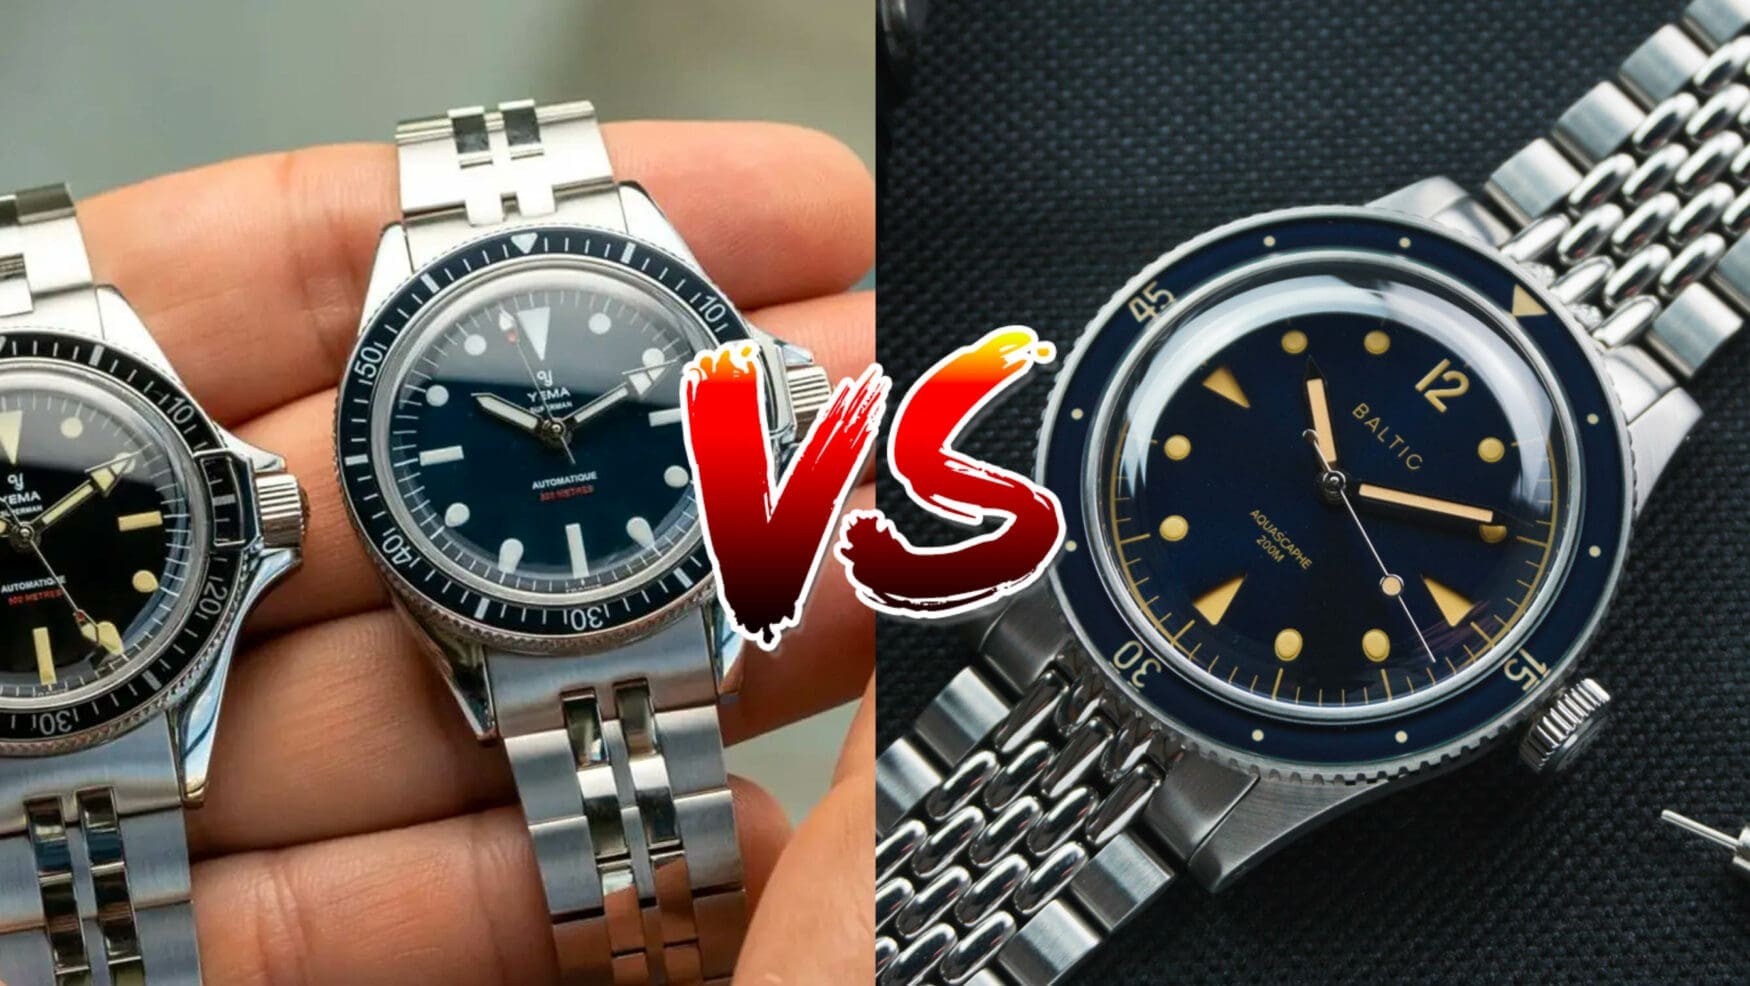 Battle of the French independents – Yema Superman 500 versus the Baltic Aquascaphe